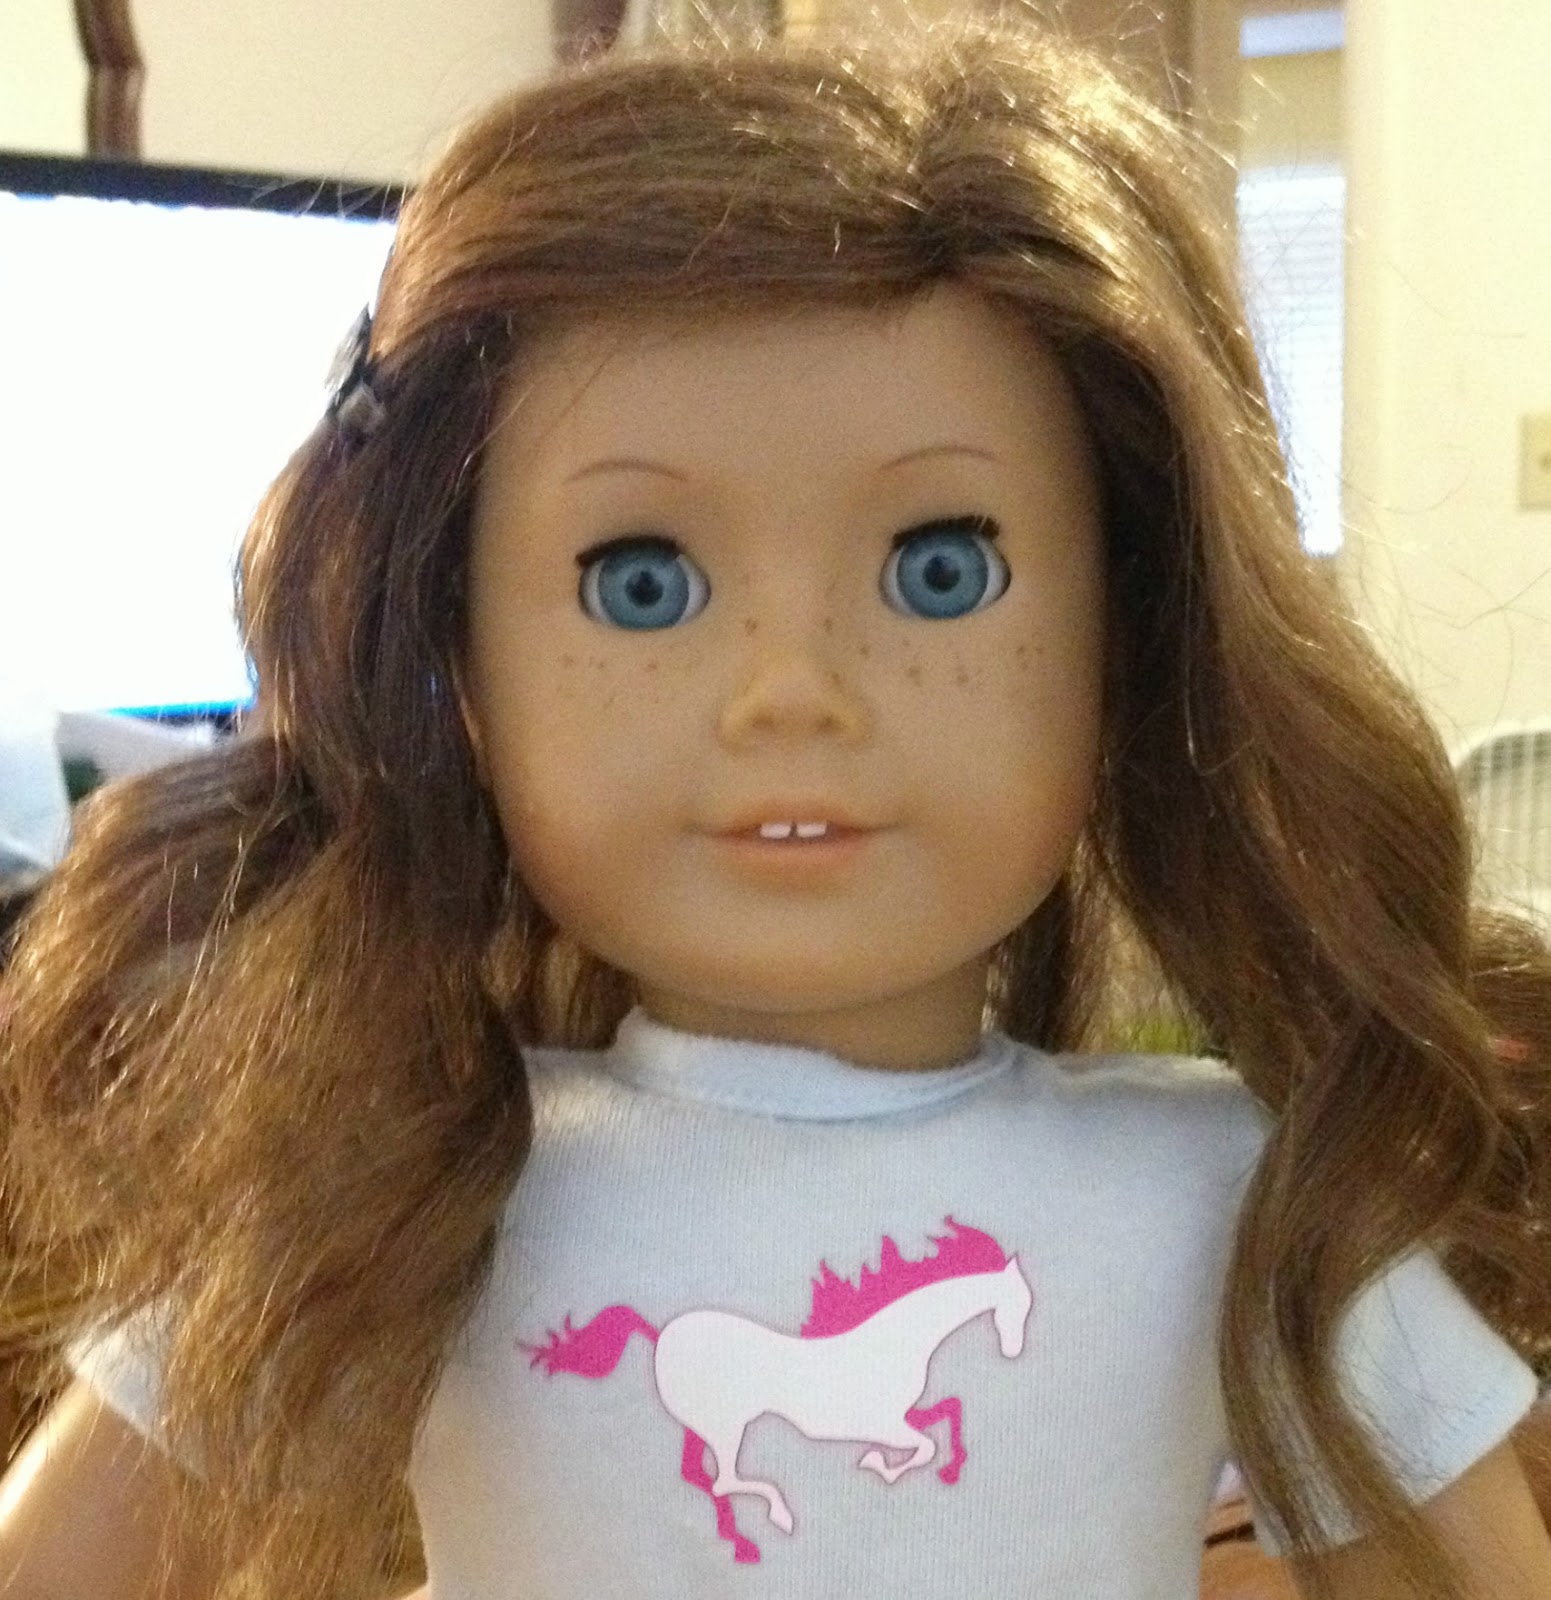 How To Fix American Girl Doll Hair A Tutorial With Before After